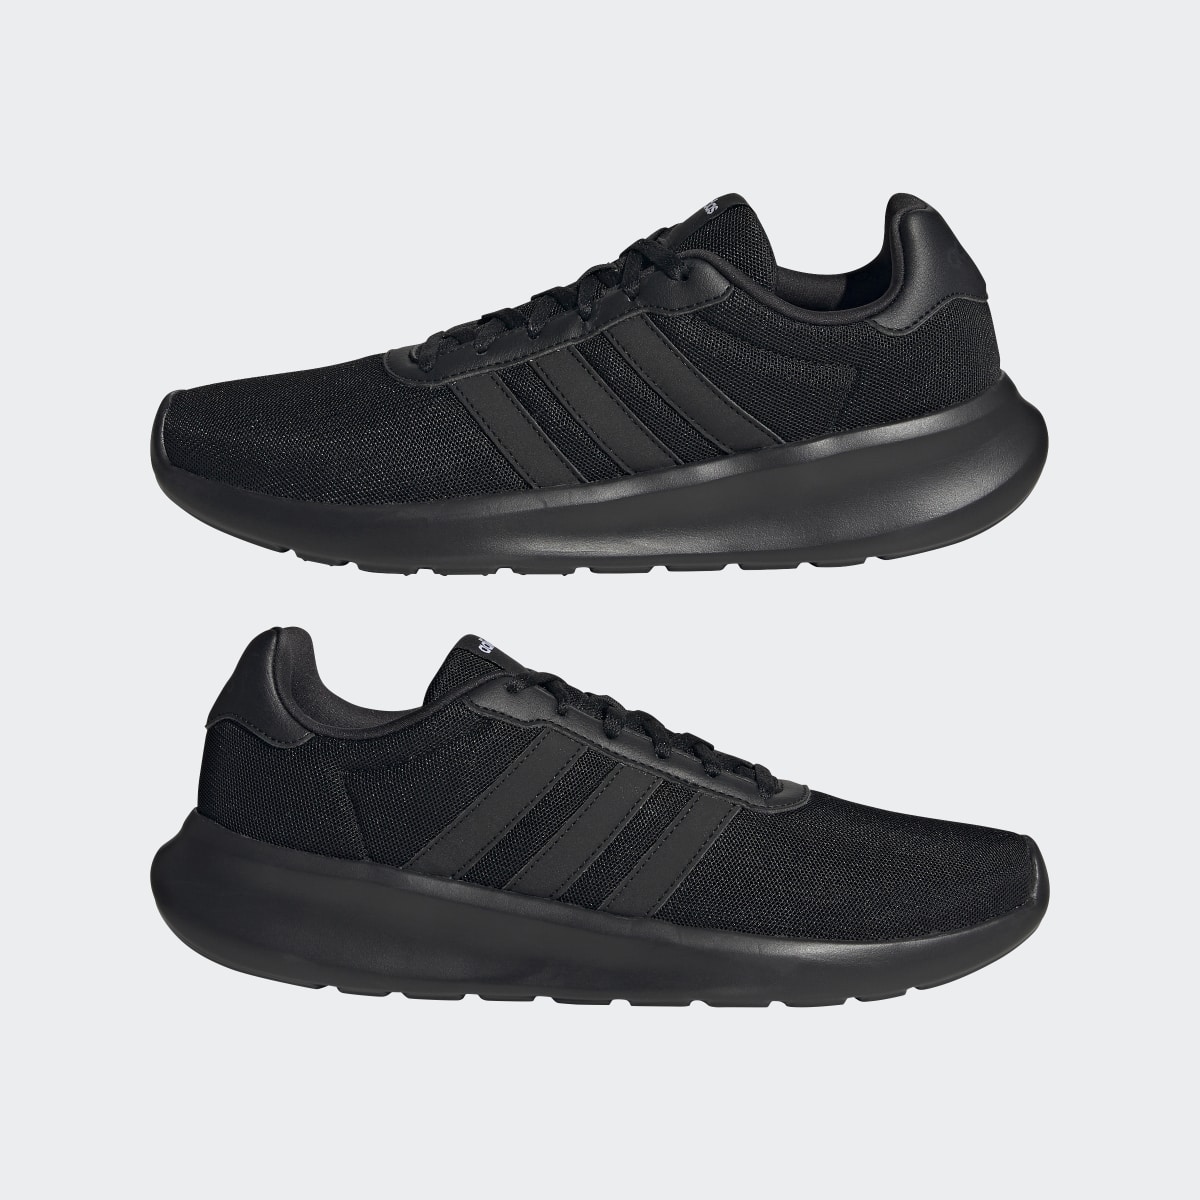 Adidas Lite Racer 3.0 Shoes. 11